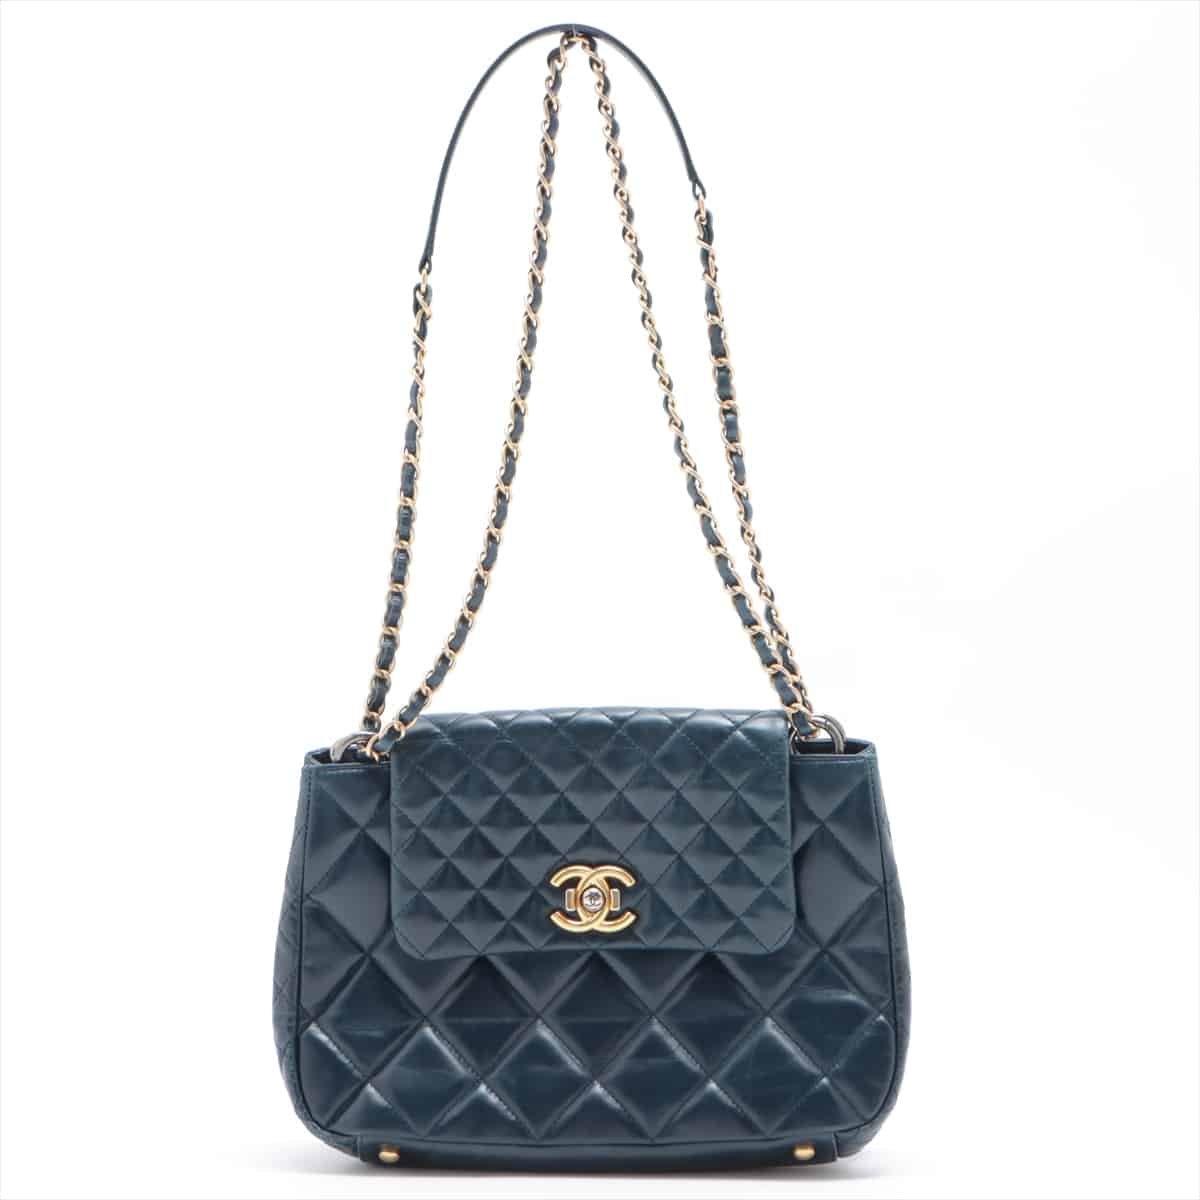 Chanel Matelasse Leather Chain shoulder bag Navy blue Gold x silver metal fittings 20XXXXXX